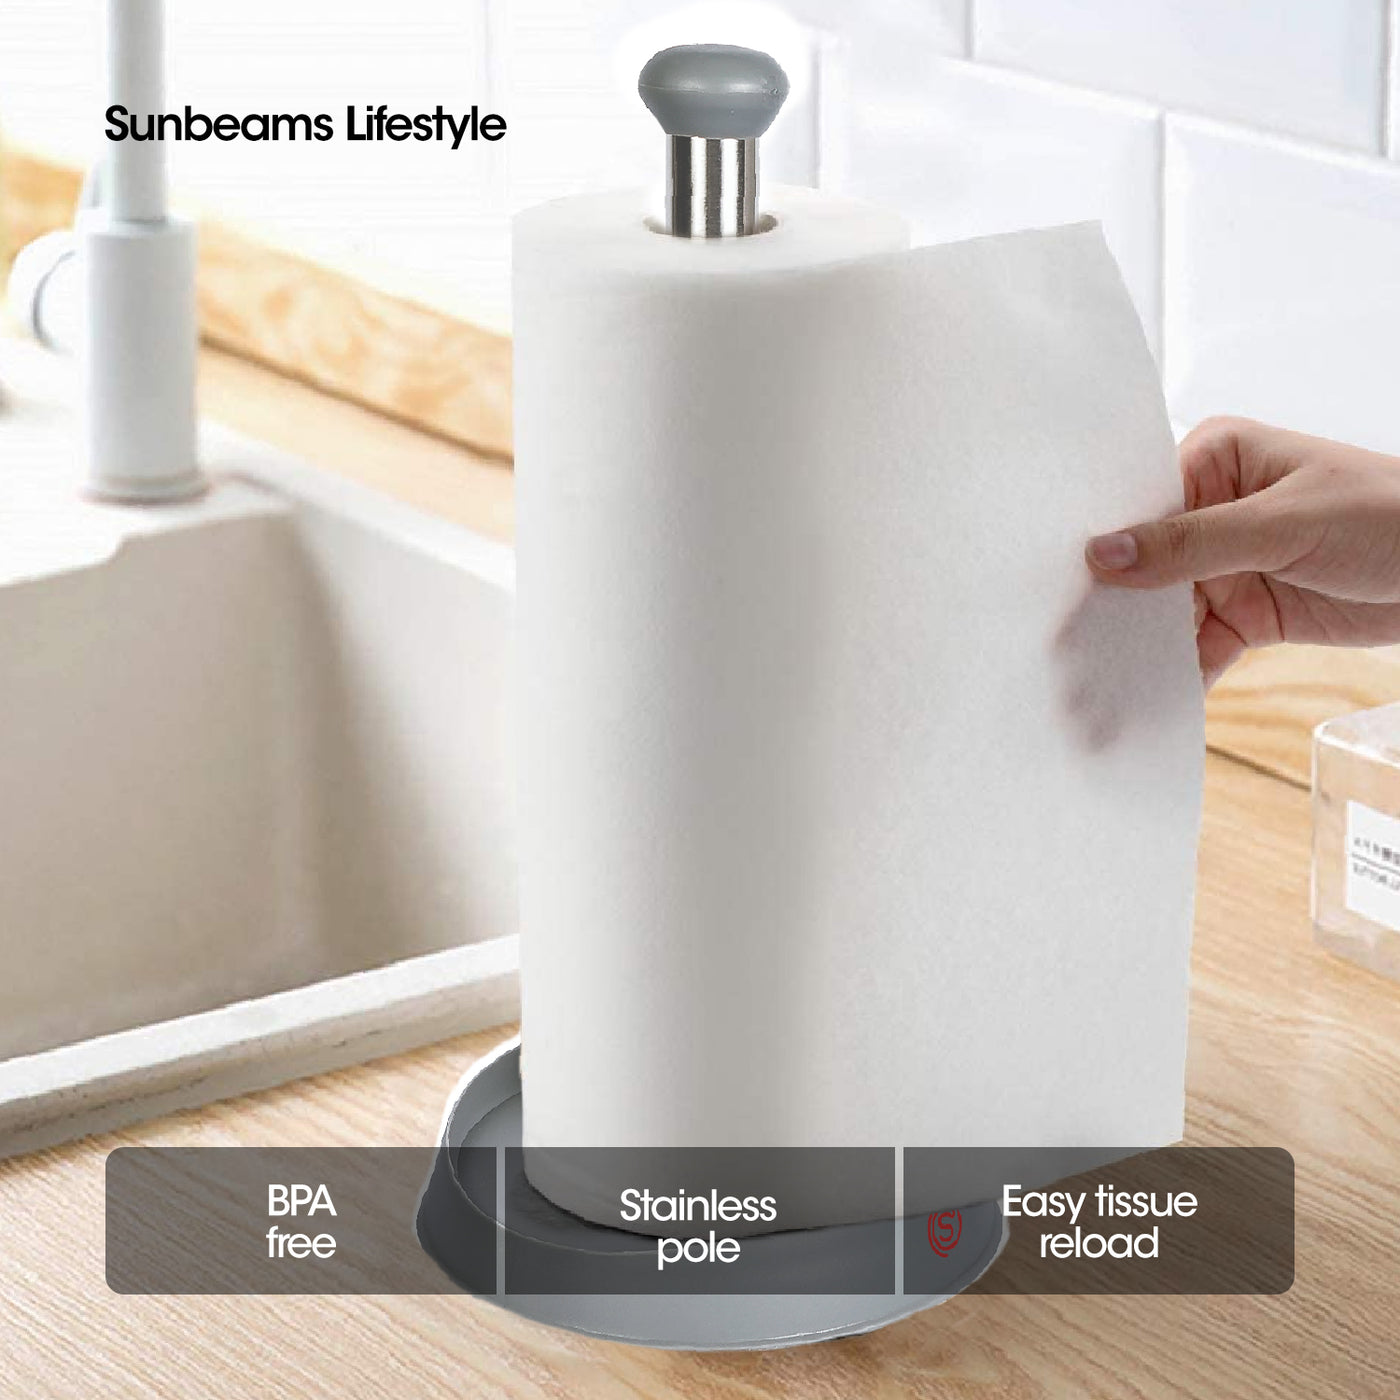 SLIQUE Premium Paper Roll Holder 17x17x34cm Kitchen Essential Amazing Gift Idea For Any Occasion!